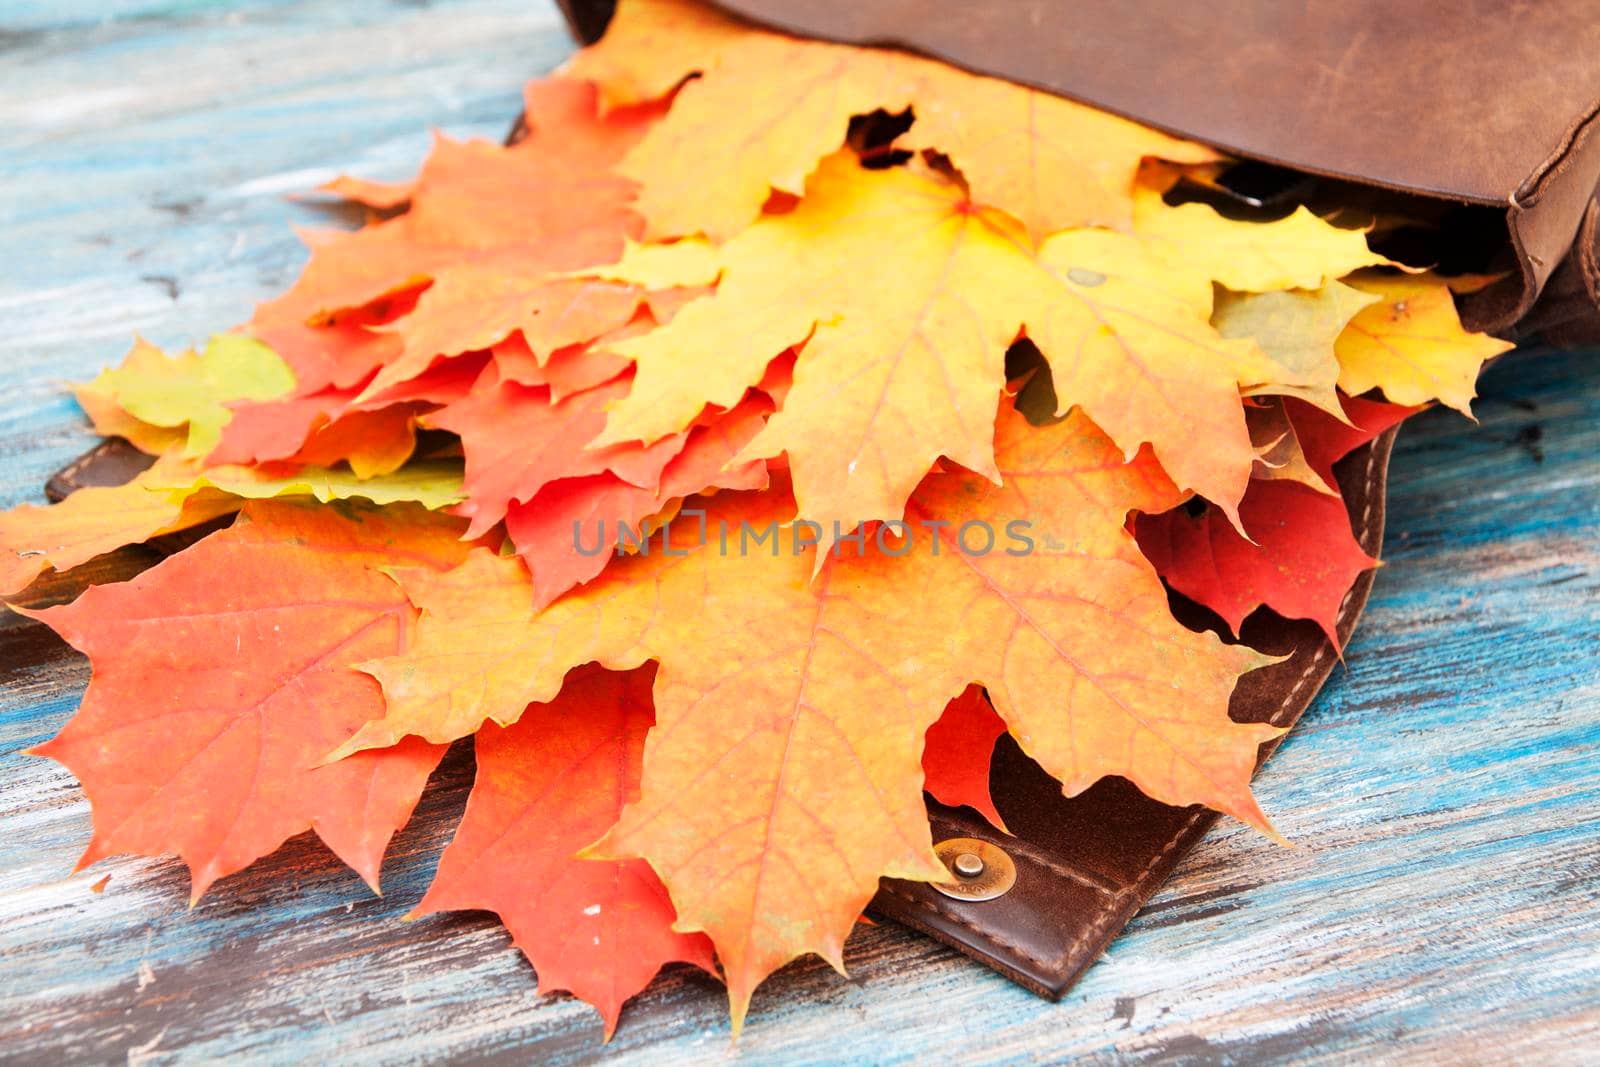 Bright orange, red autumn leaves in an leather bag. Autumn concept by ssvimaliss